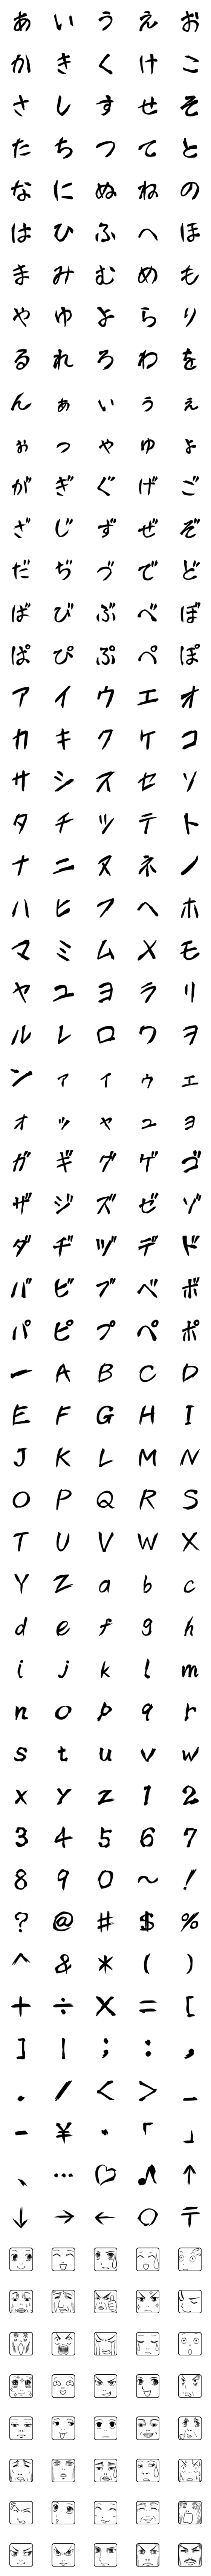 [LINE絵文字]マンガ風絵文字の画像一覧